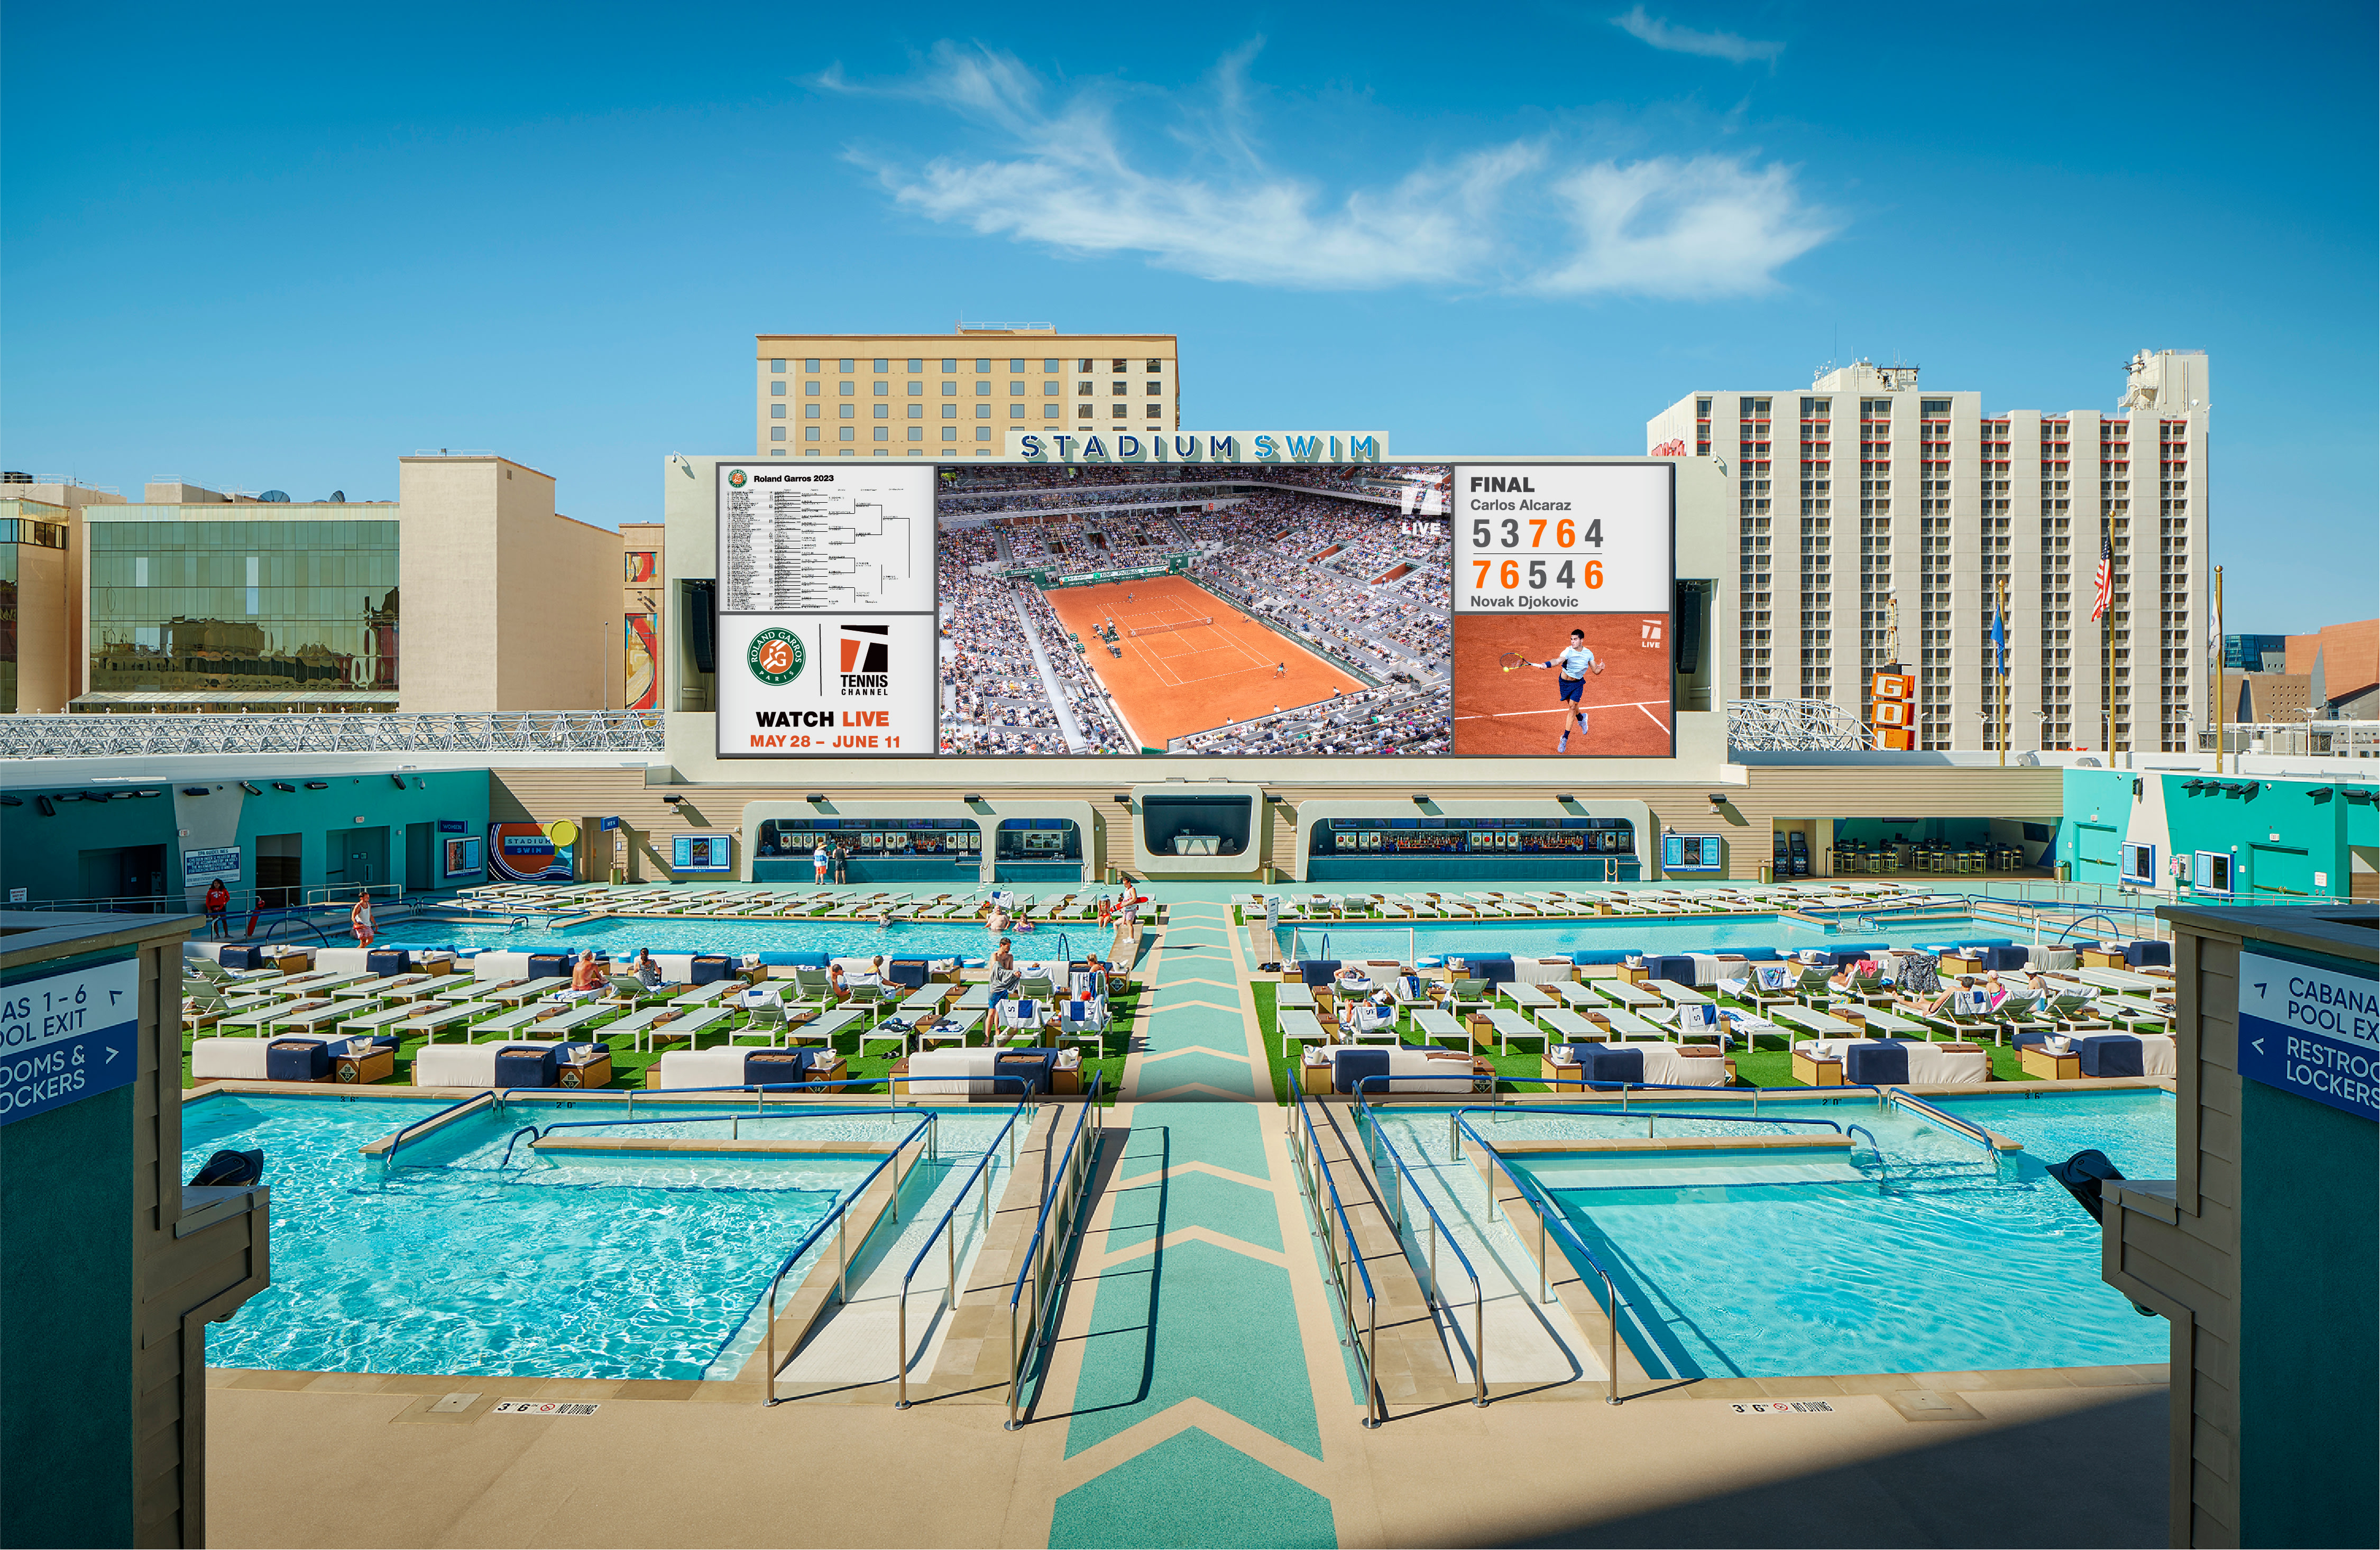 Circas Stadium Swim serves up a Roland Garros watch party unlike any other